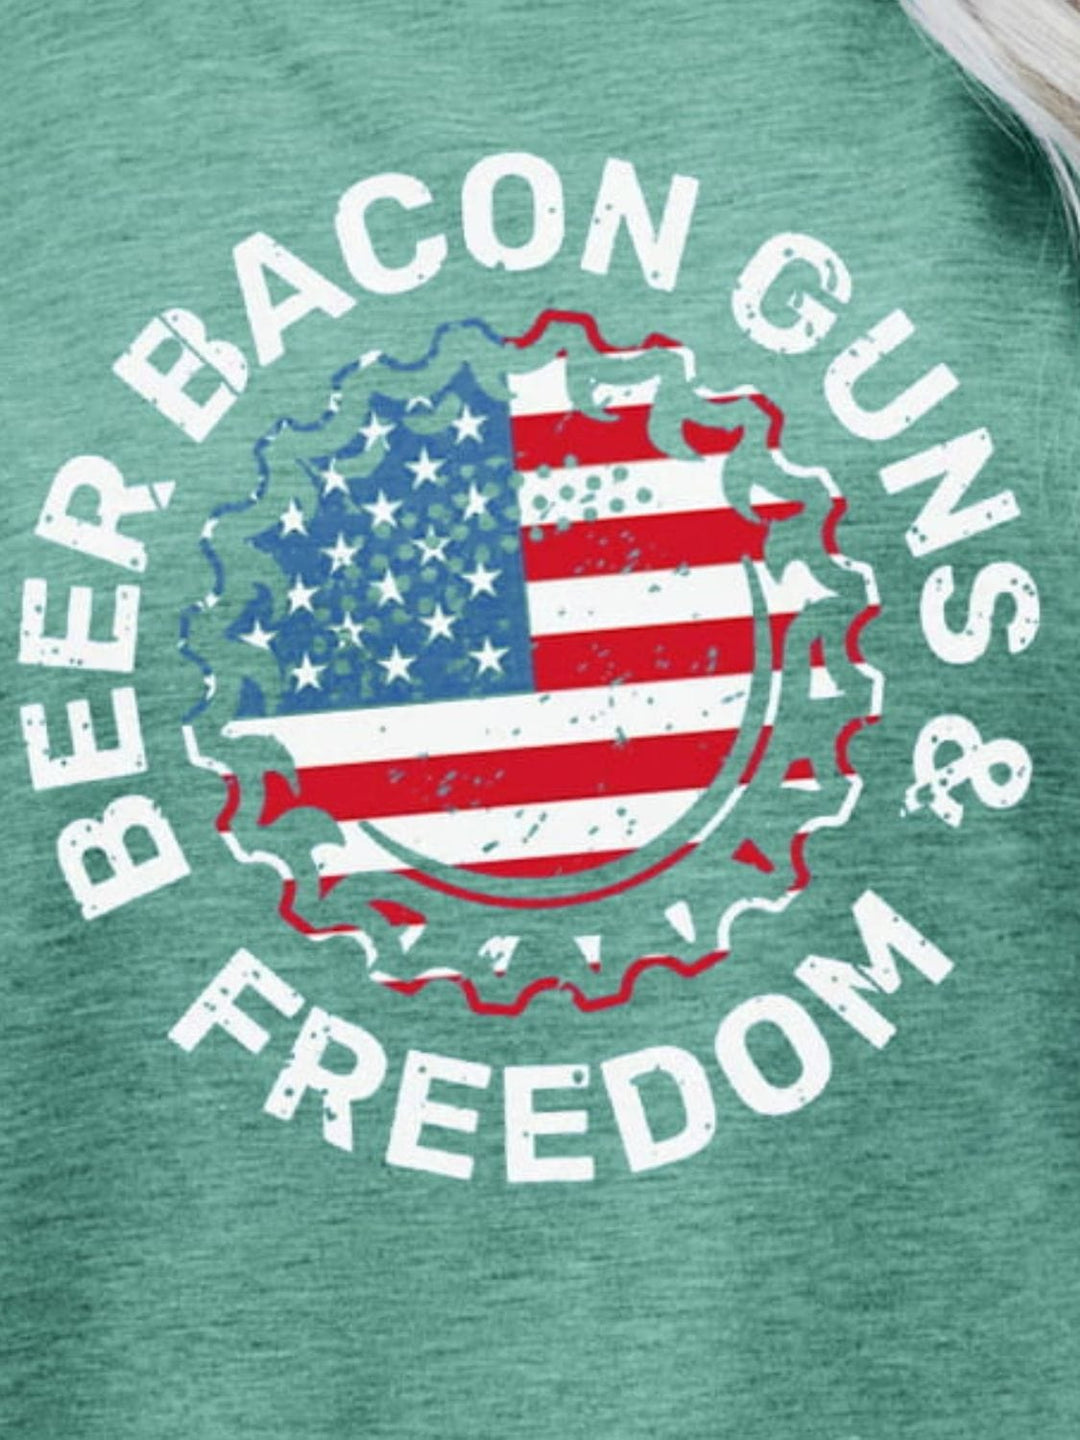 The802Gypsy shirts and tops GYPSY-BEER BACON GUNS & FREEDOM US Flag Graphic Tee